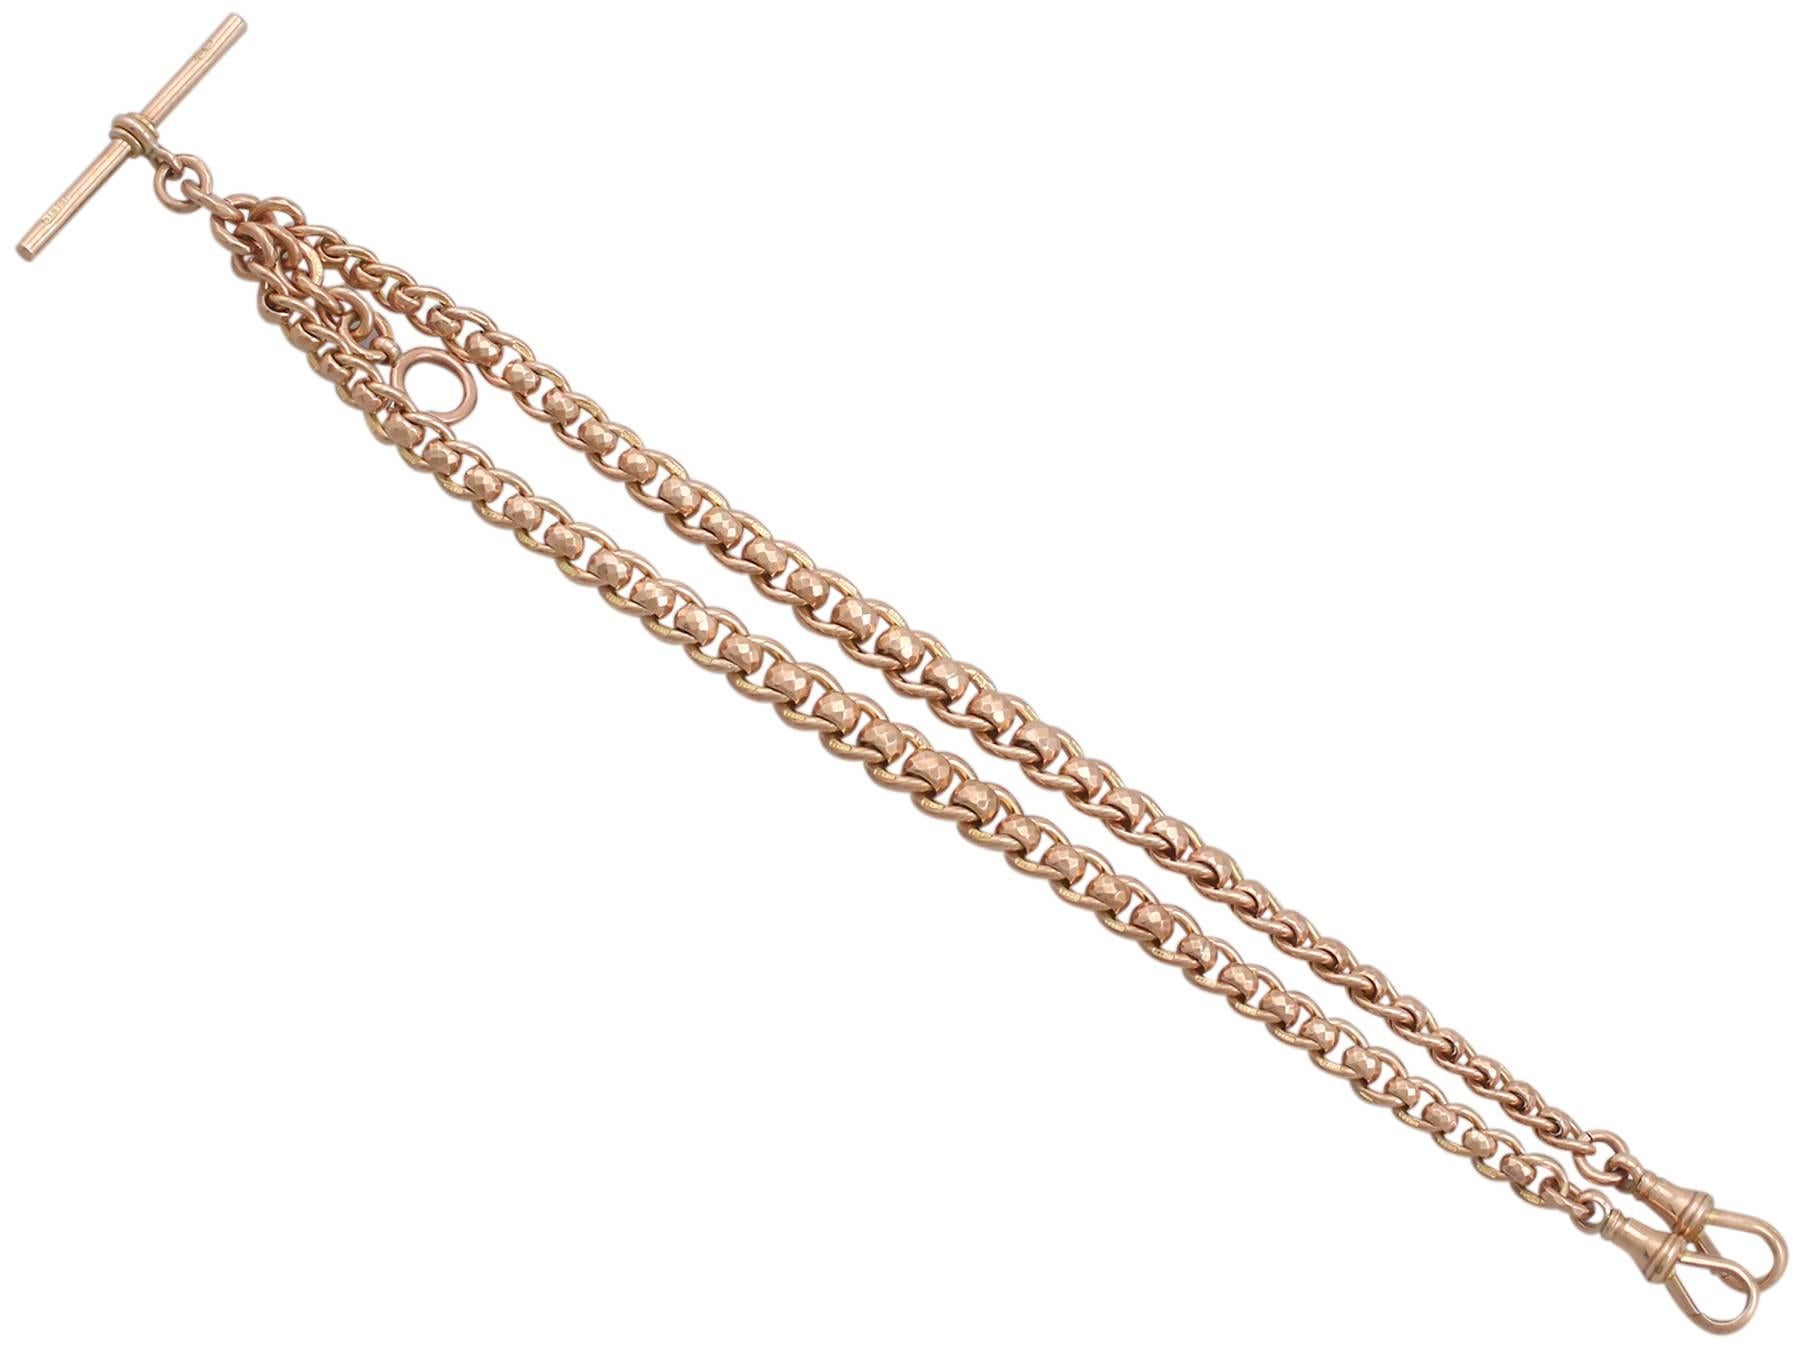 An exceptional, rare and unusual example of a 9 karat rose gold double Albert watch chain; part of our diverse antique jewelry and estate jewelry collections.

This exceptional, fine and impressive rare rose gold Albert watch chain has been crafted